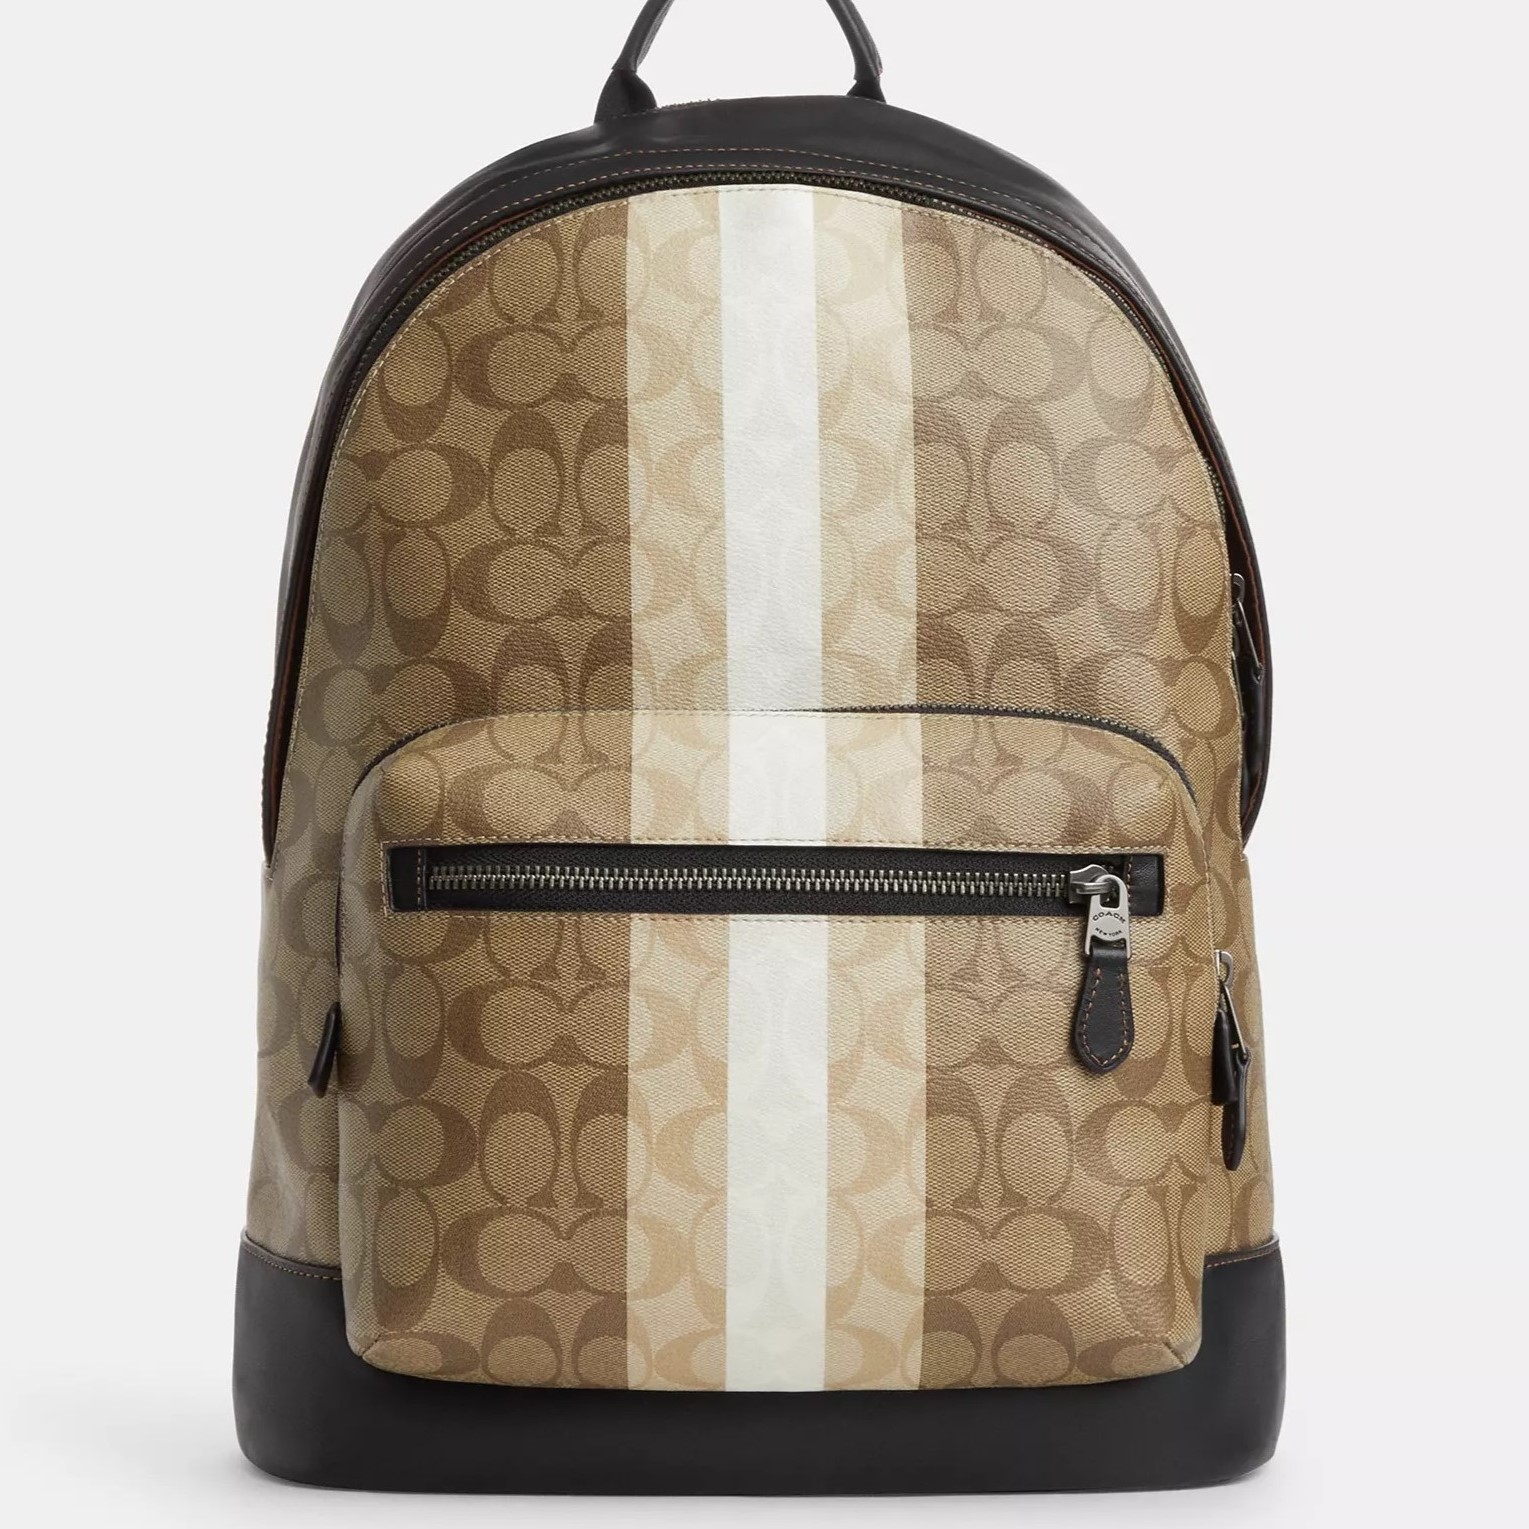 BALO MÀU NÂU SÁNG COACH WEST BACKPACK IN BLOCKED SIGNATURE CANVAS WITH VARSITY STRIPE CQ629 4